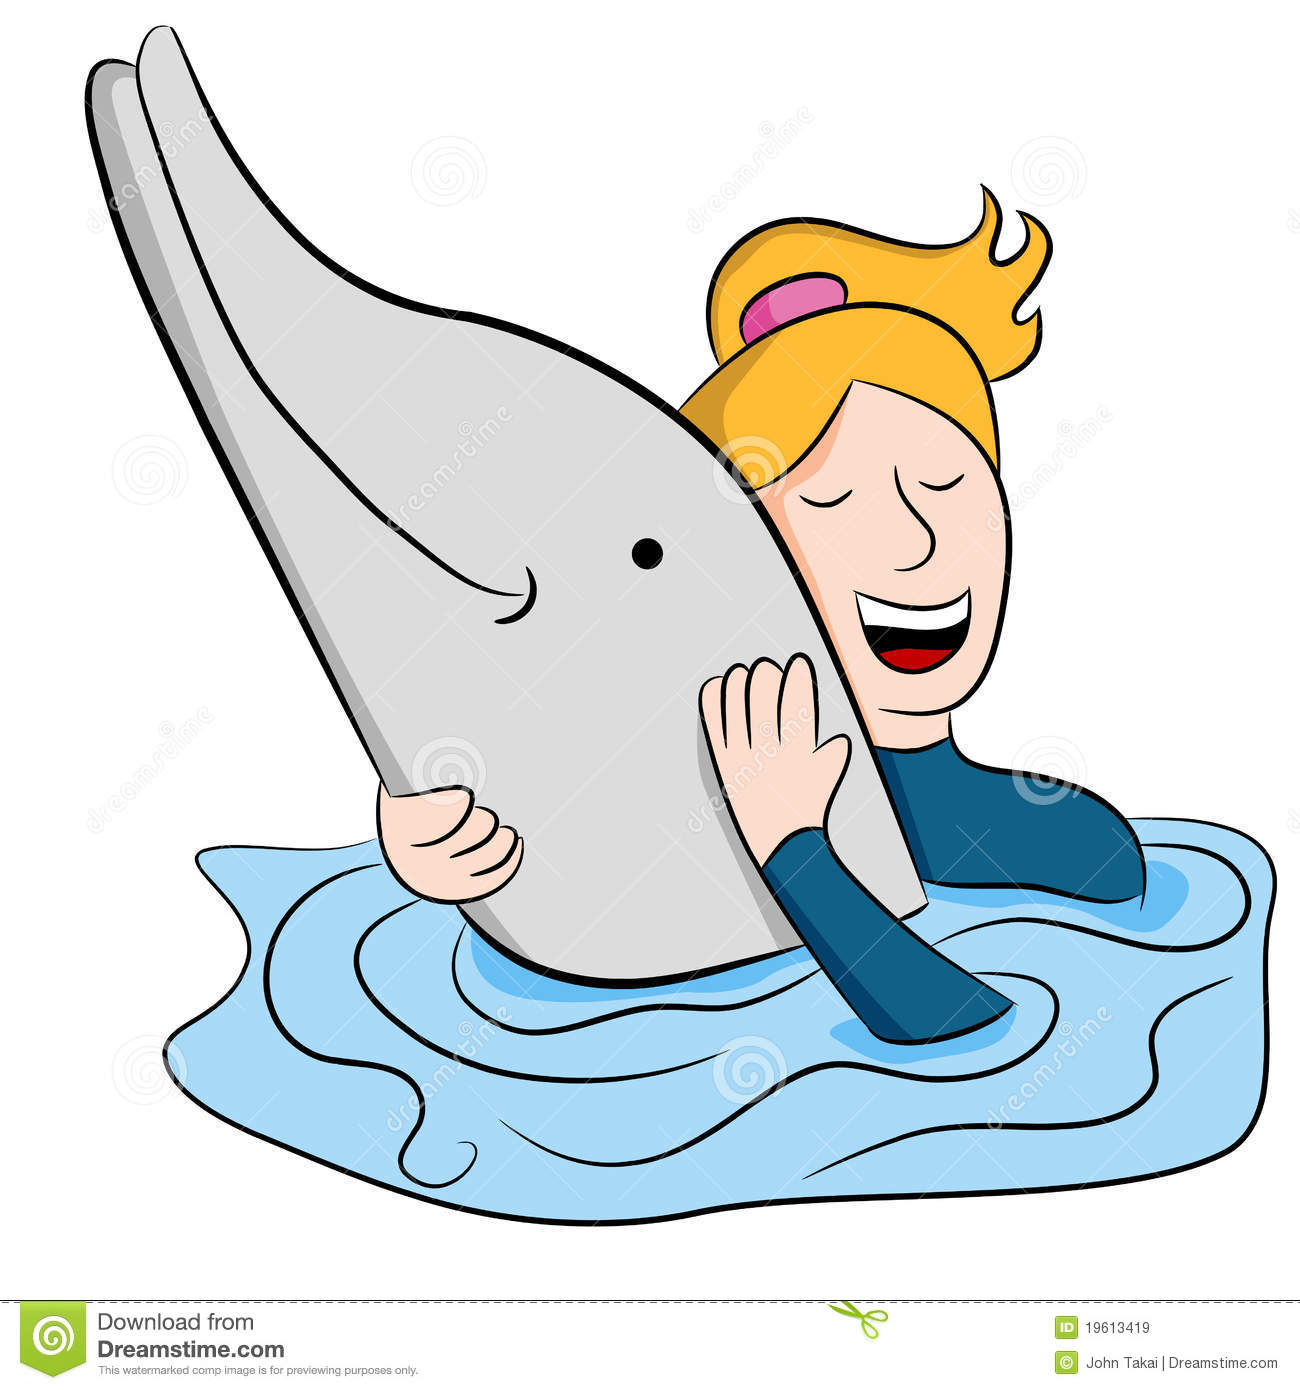 Woman Swimming With Dolphin Royalty Free Stock Images   Image